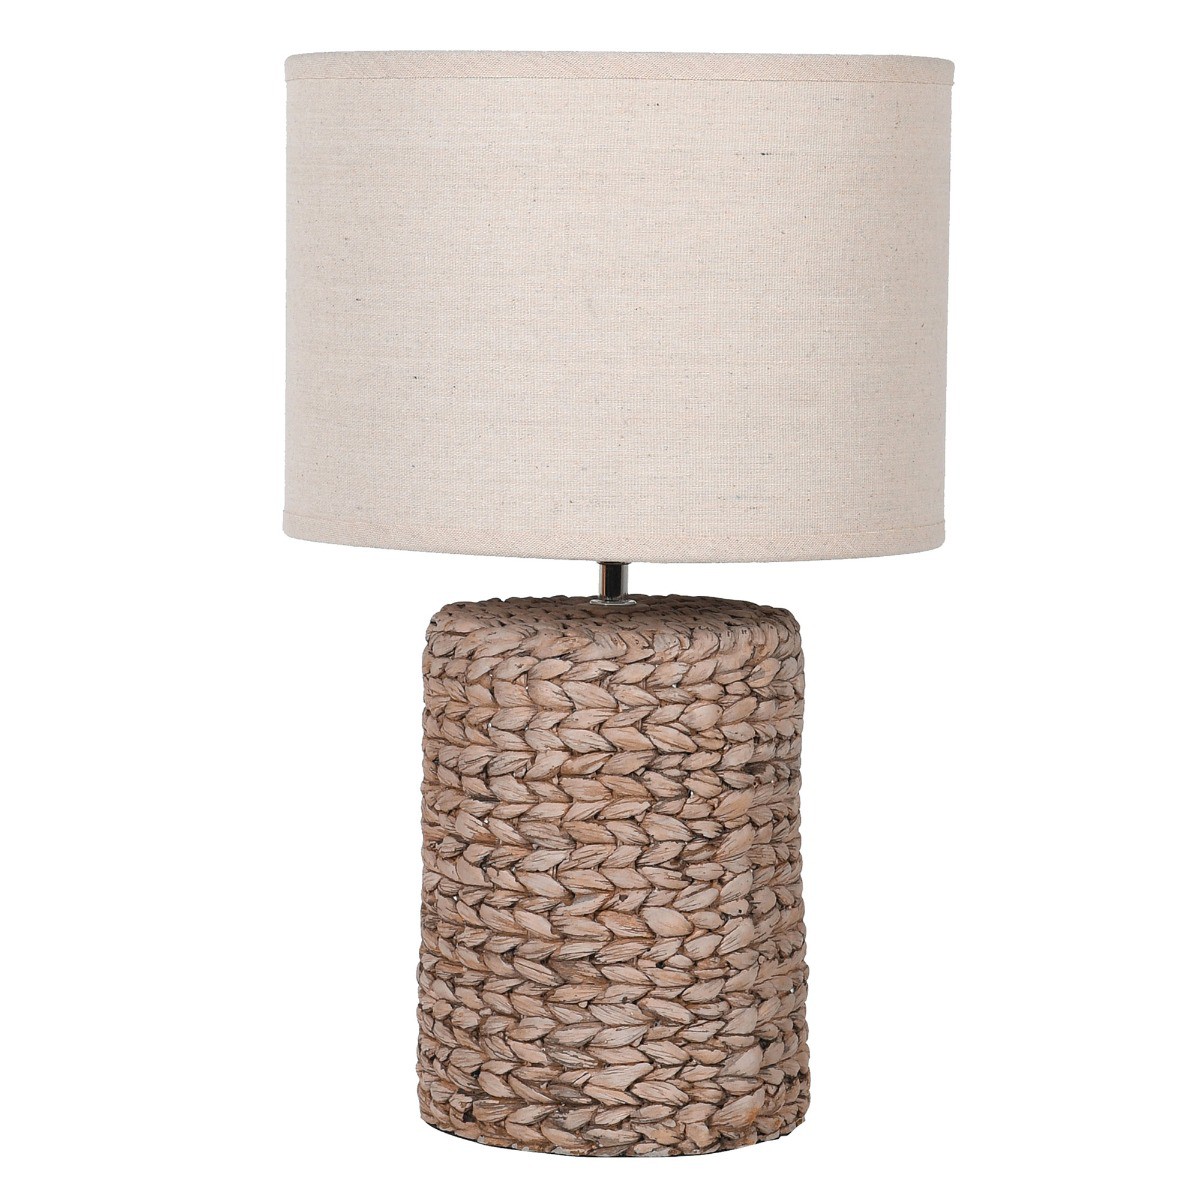 Rattan table lamp for £49 from Barker and Stonehouse